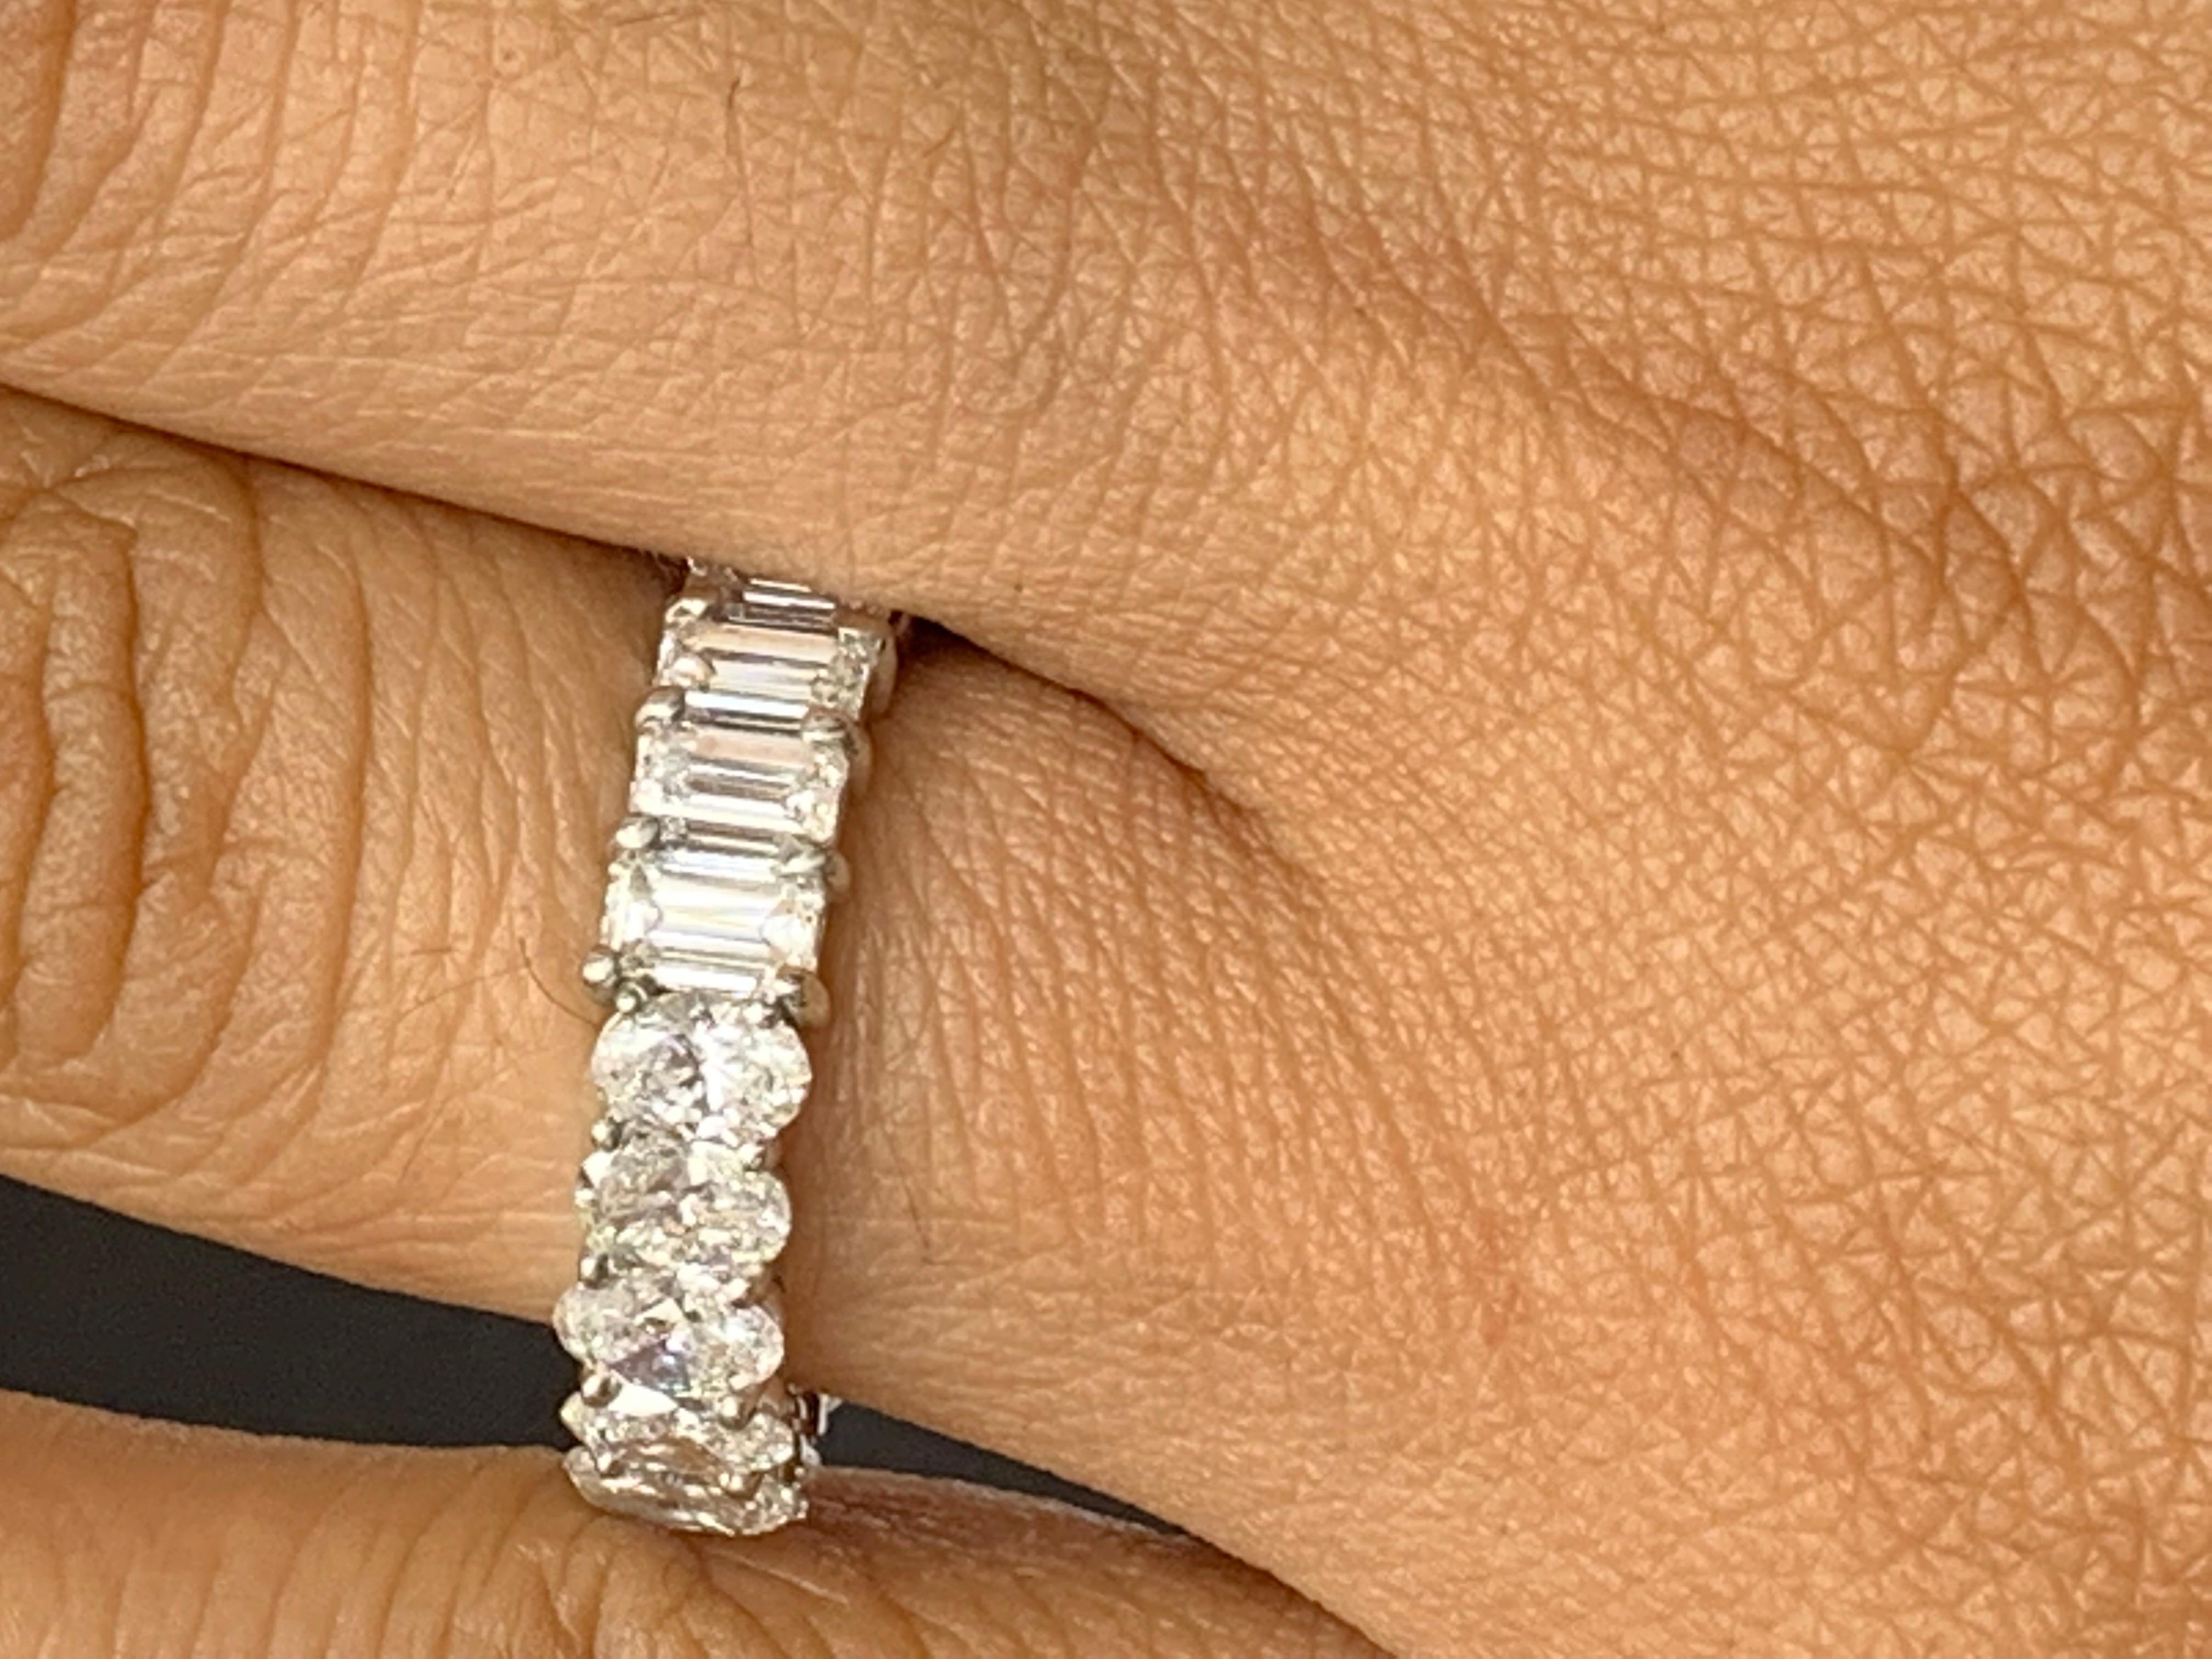 A classic and timeless eternity band style showcasing a row of half emerald cut and half oval cut diamonds set in a shared prong platinum mounting. 11 emerald cut Diamonds weigh 2.56 carats and 10 oval cut diamonds weigh 2.41 carats. Can be